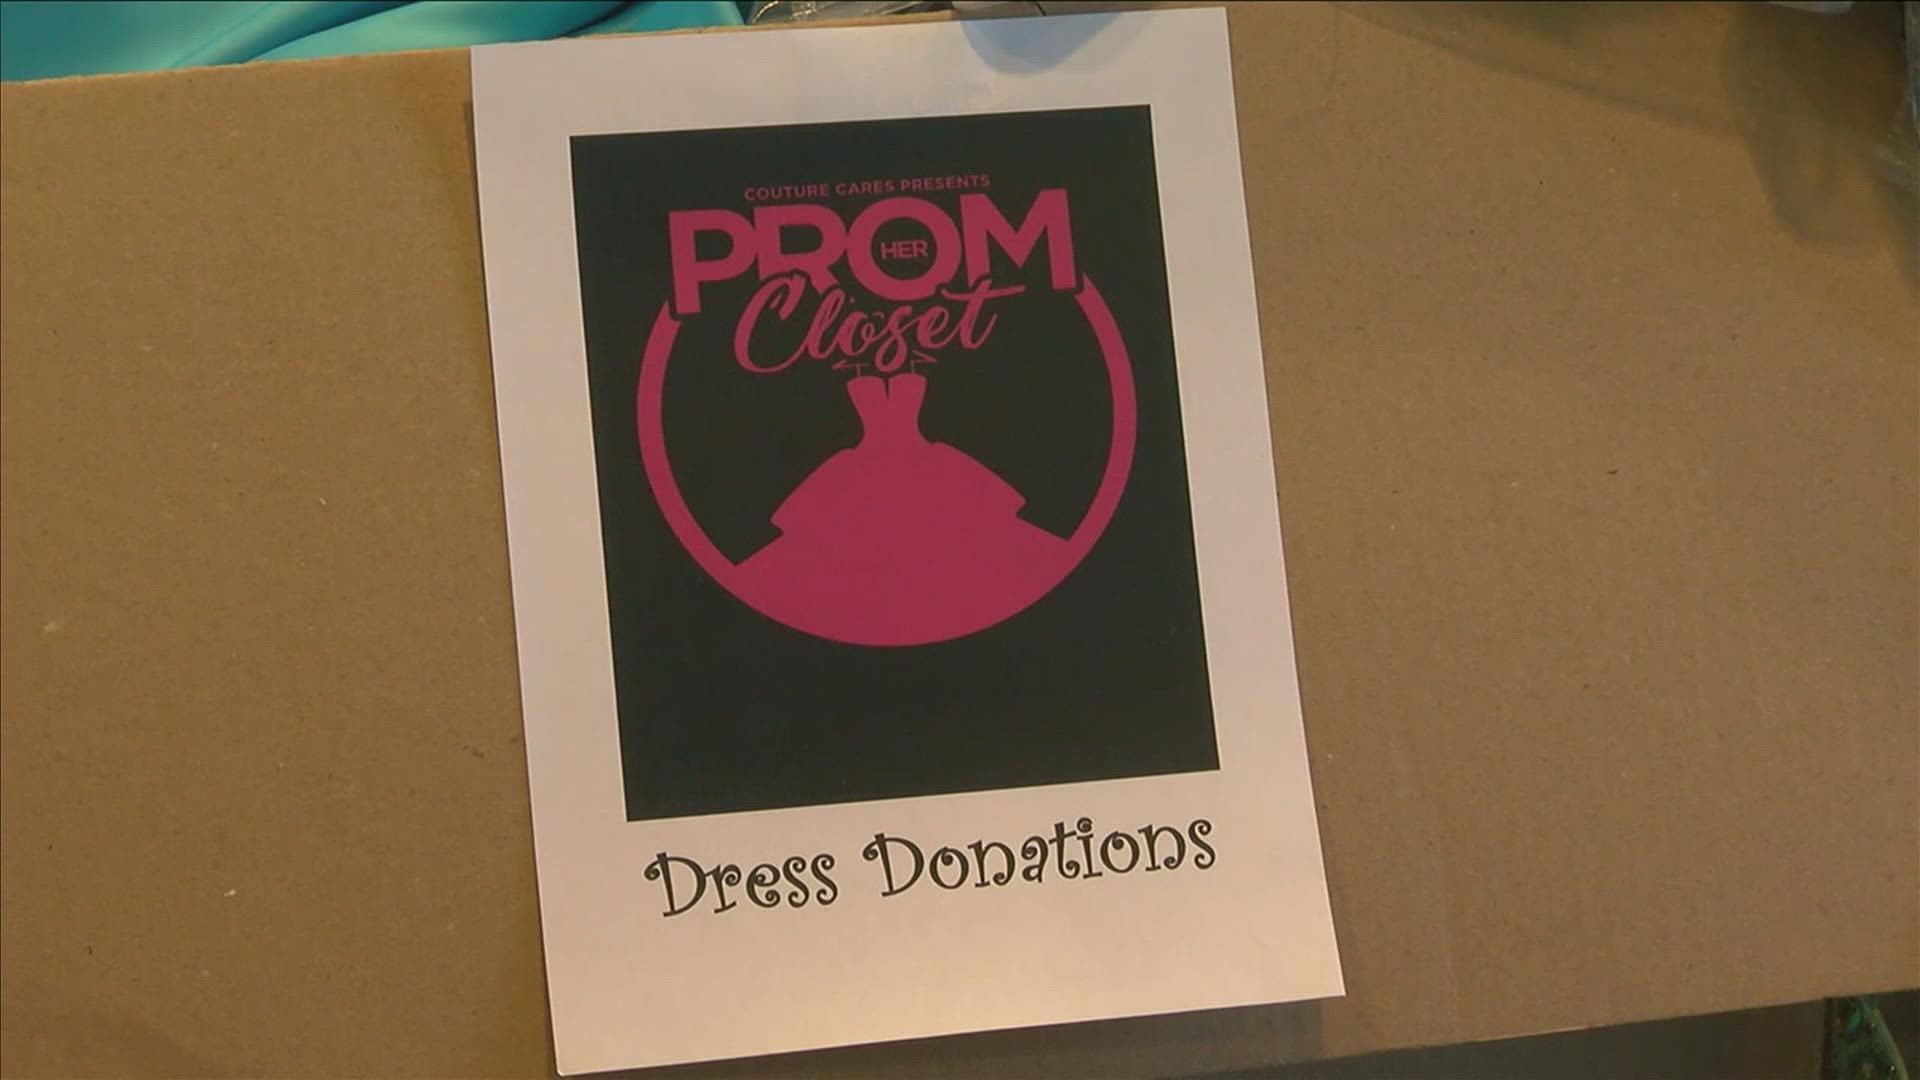 Couture Cares is helping local students with the first part, by collecting prom dresses to give out for free to those in need through 'Her Prom Closet.'